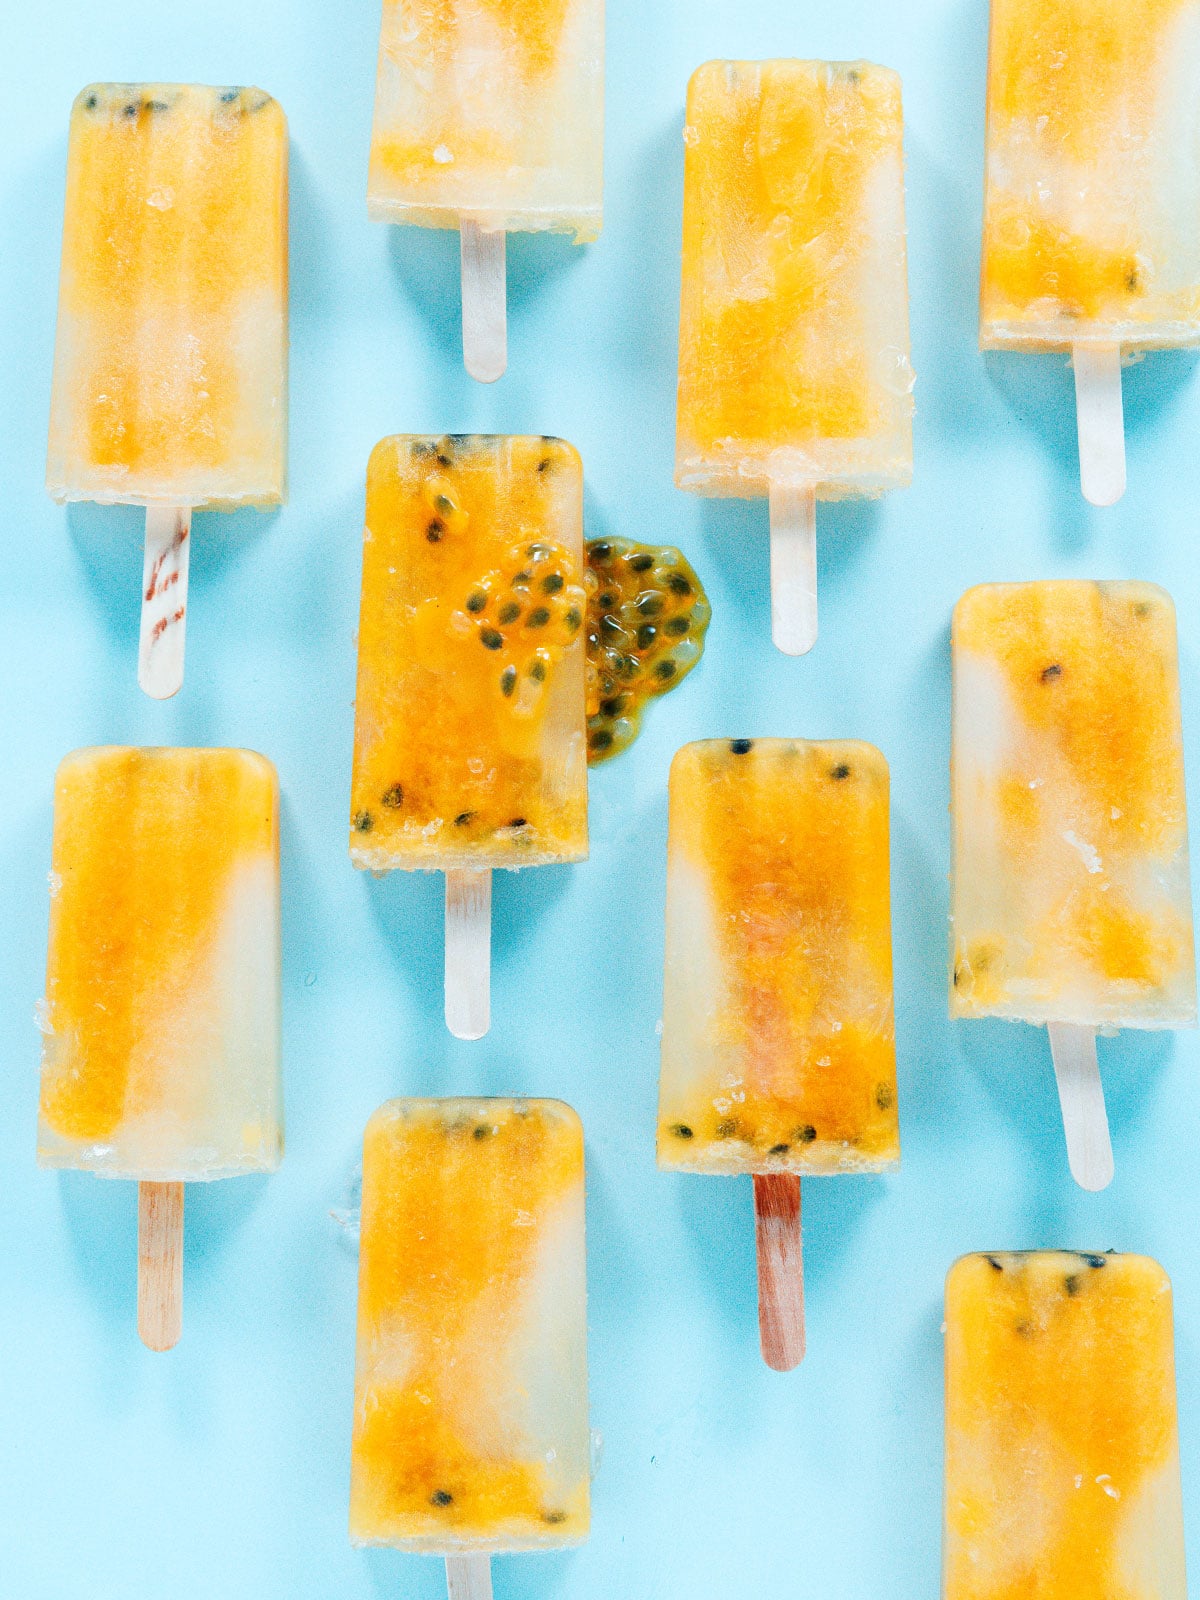 Multiple passion fruit popsicles on a blue background.